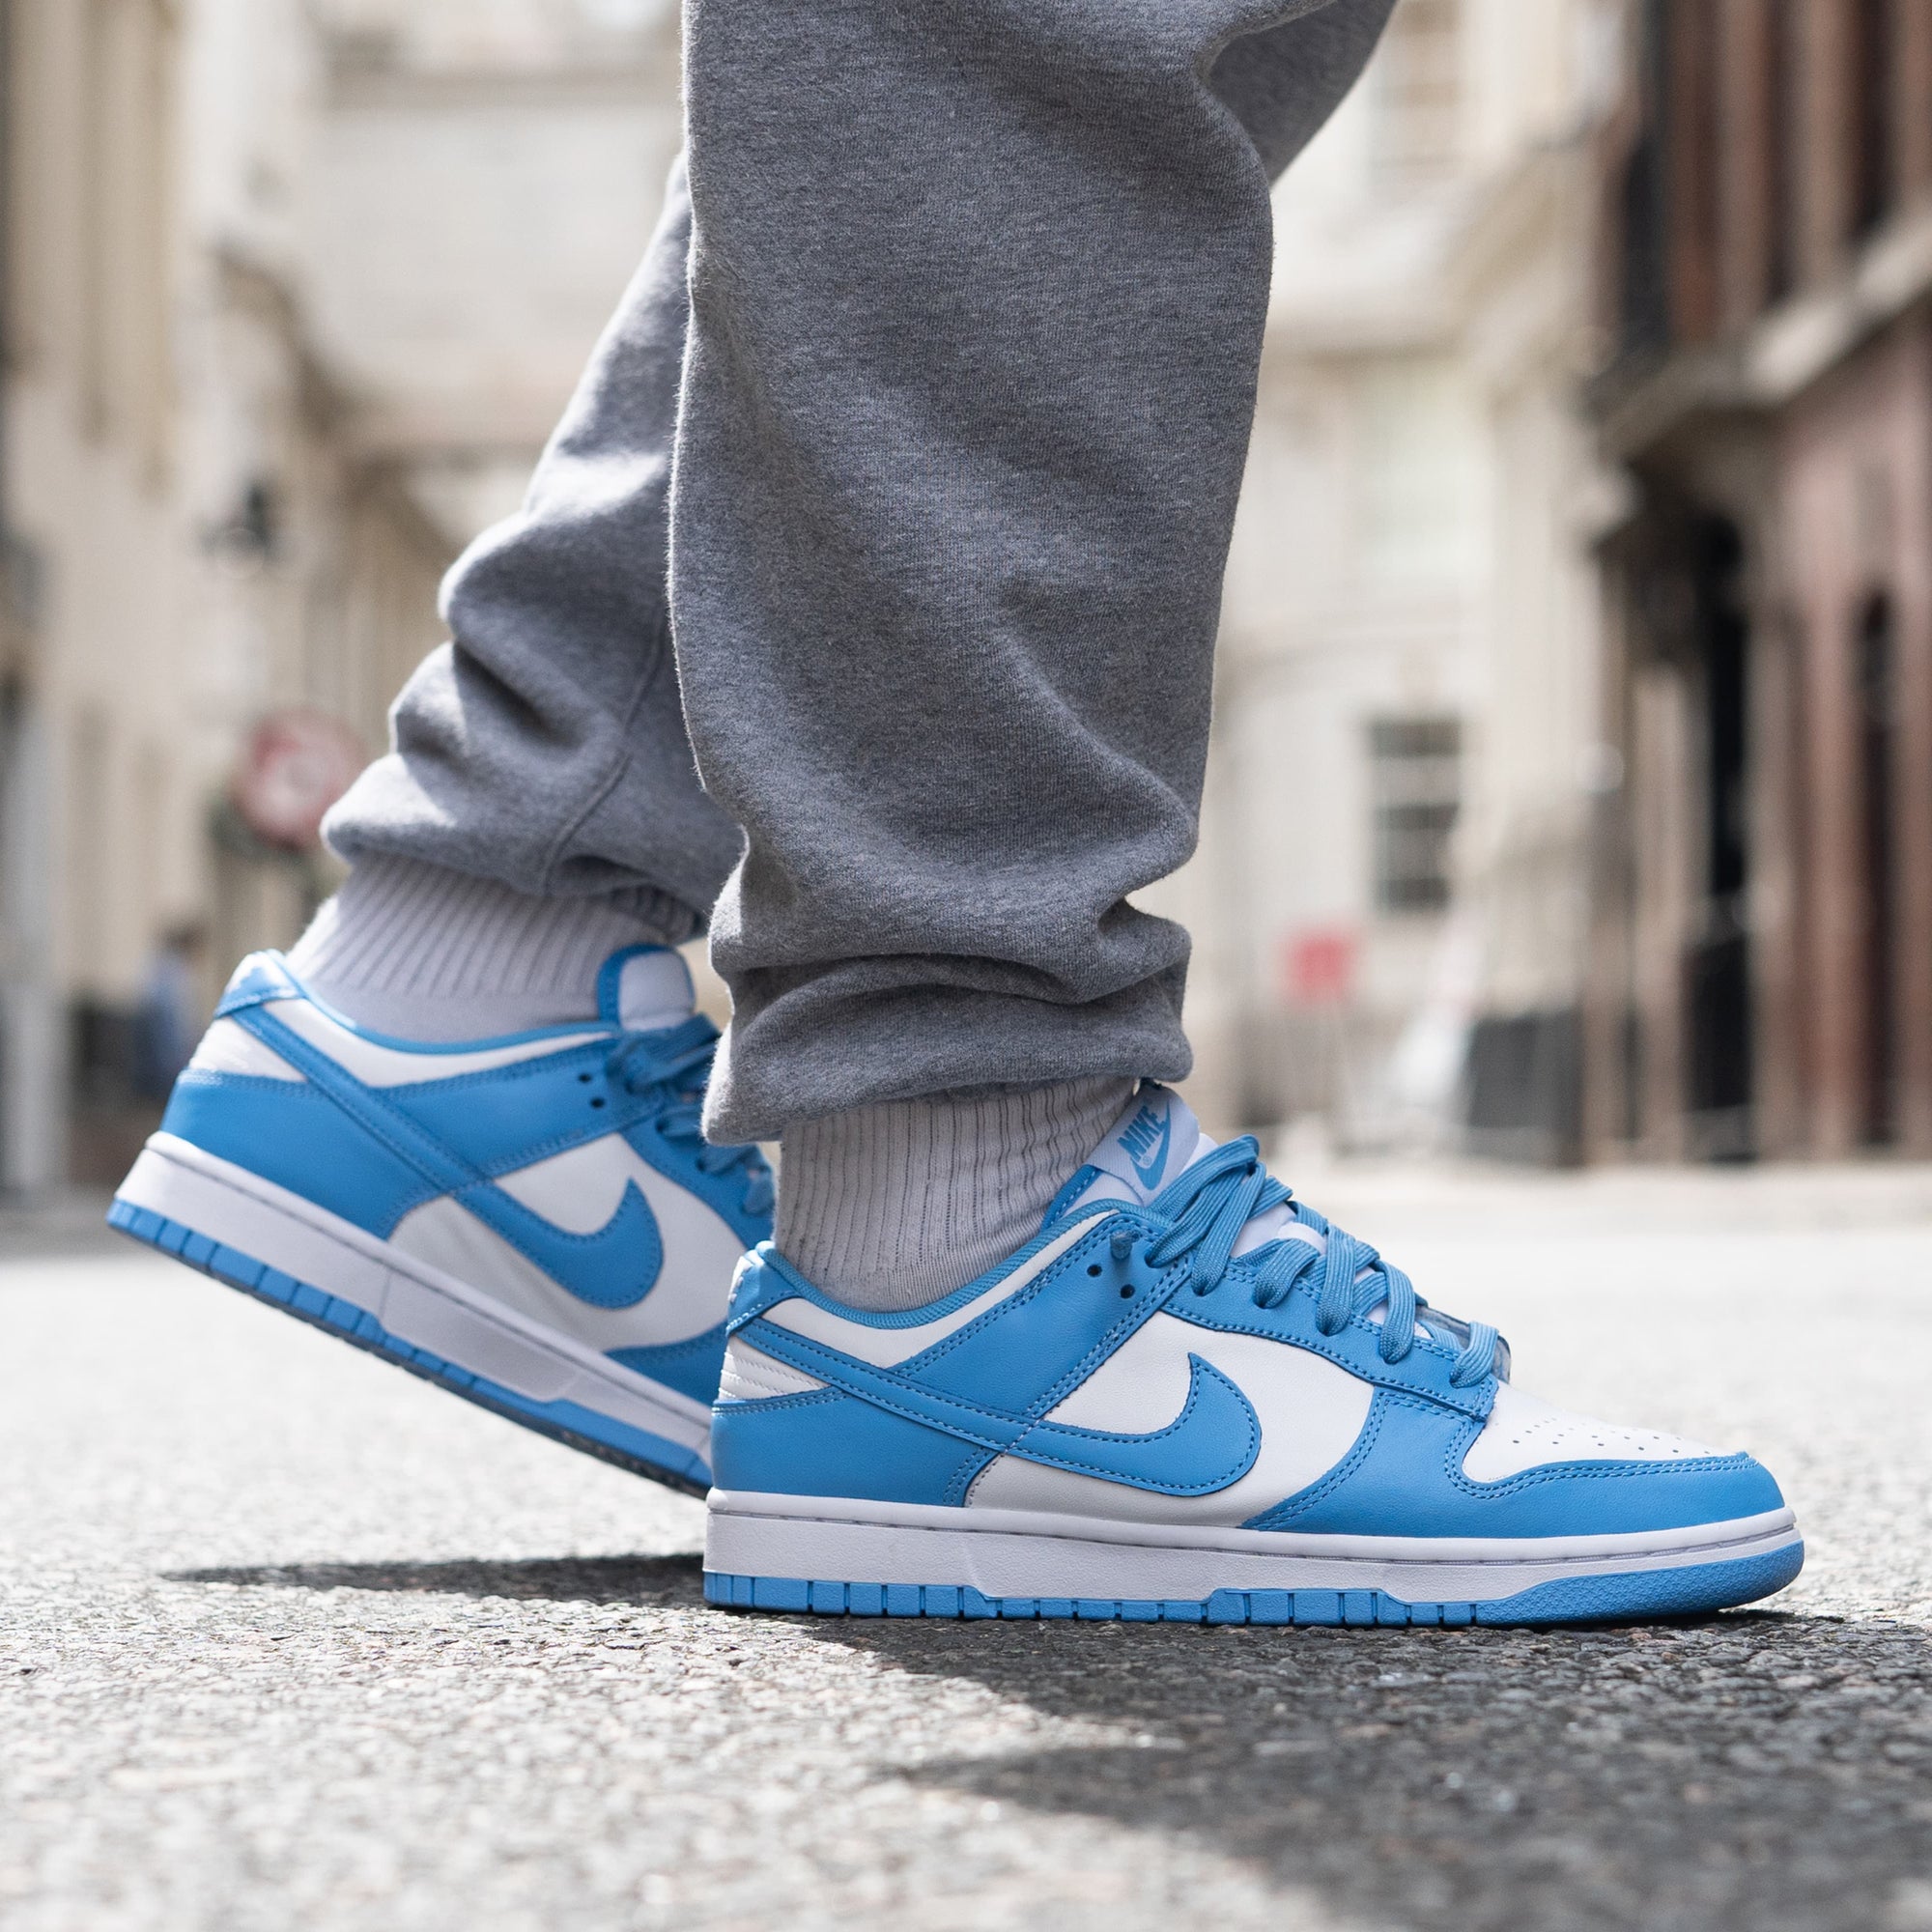 On-foot Look at the Nike Dunk Low 'University Blue'